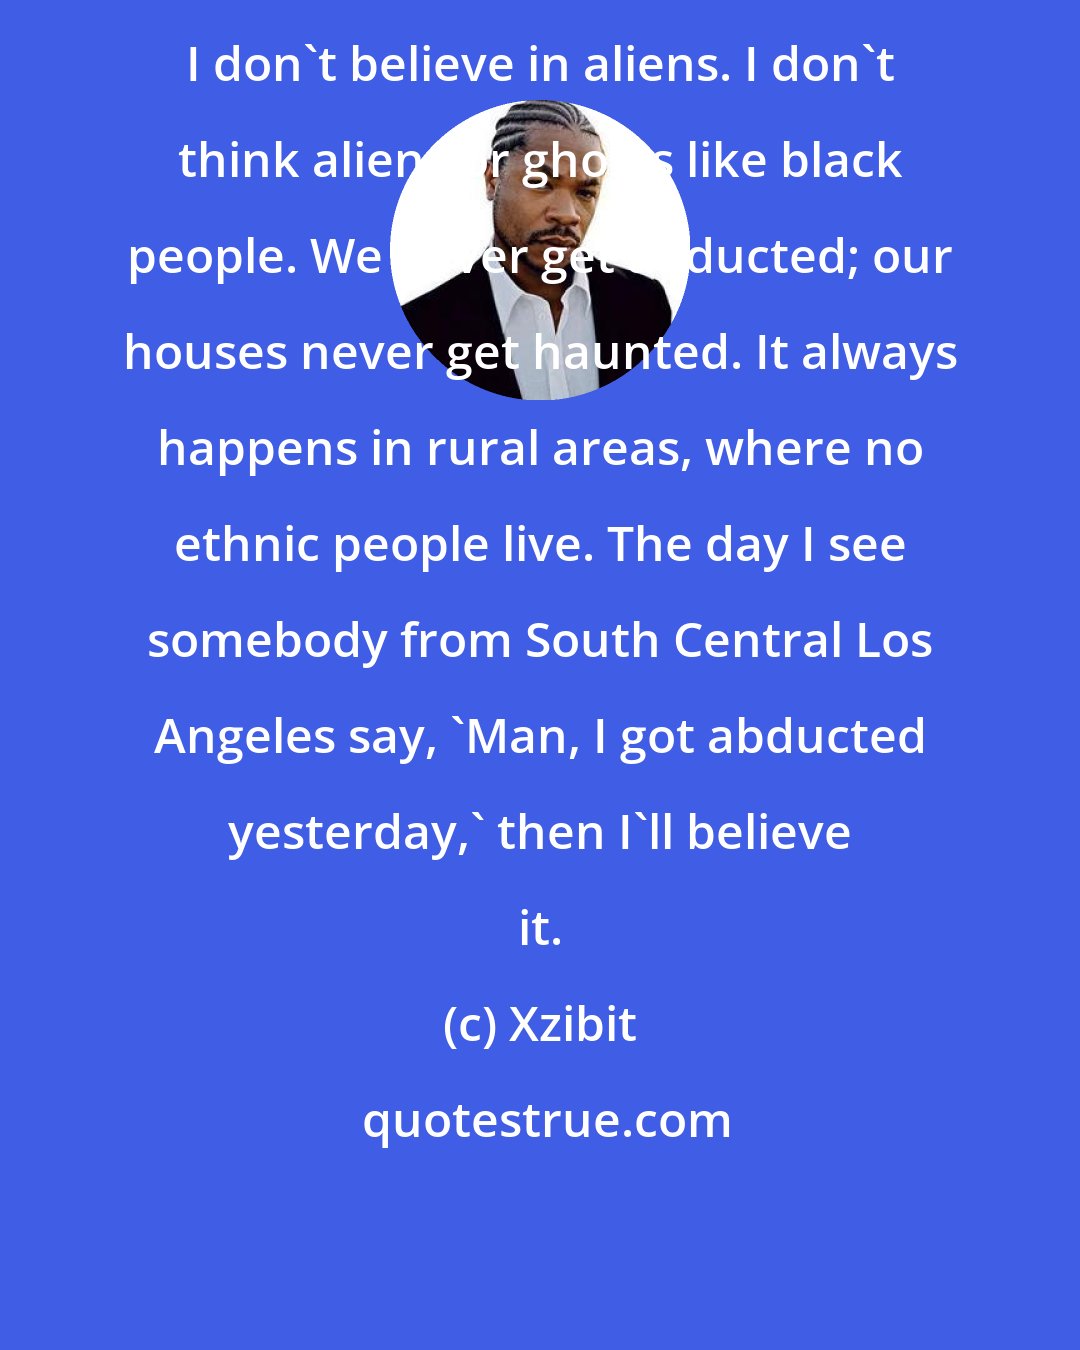 Xzibit: I don't believe in aliens. I don't think aliens or ghosts like black people. We never get abducted; our houses never get haunted. It always happens in rural areas, where no ethnic people live. The day I see somebody from South Central Los Angeles say, 'Man, I got abducted yesterday,' then I'll believe it.